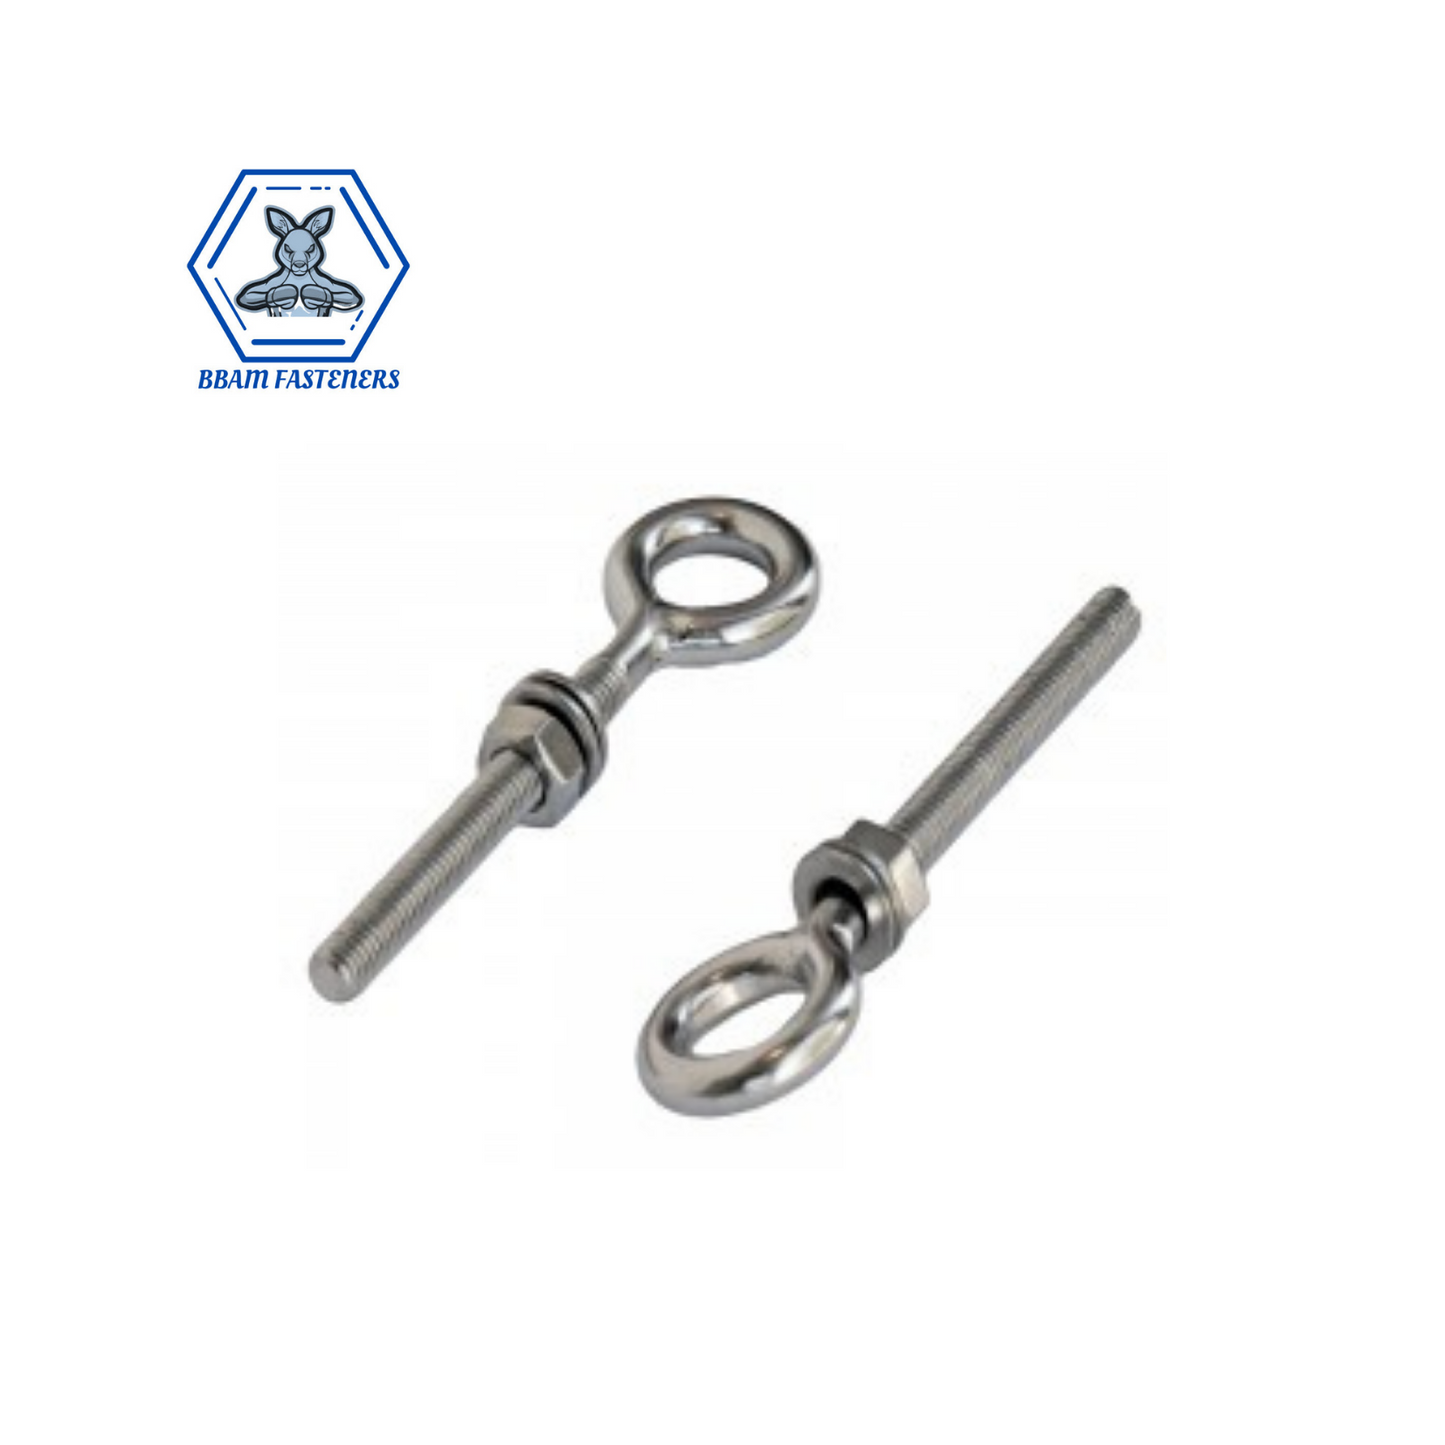 M8 x 60mm Eyebolt with Nut & Washer Stainless Steel